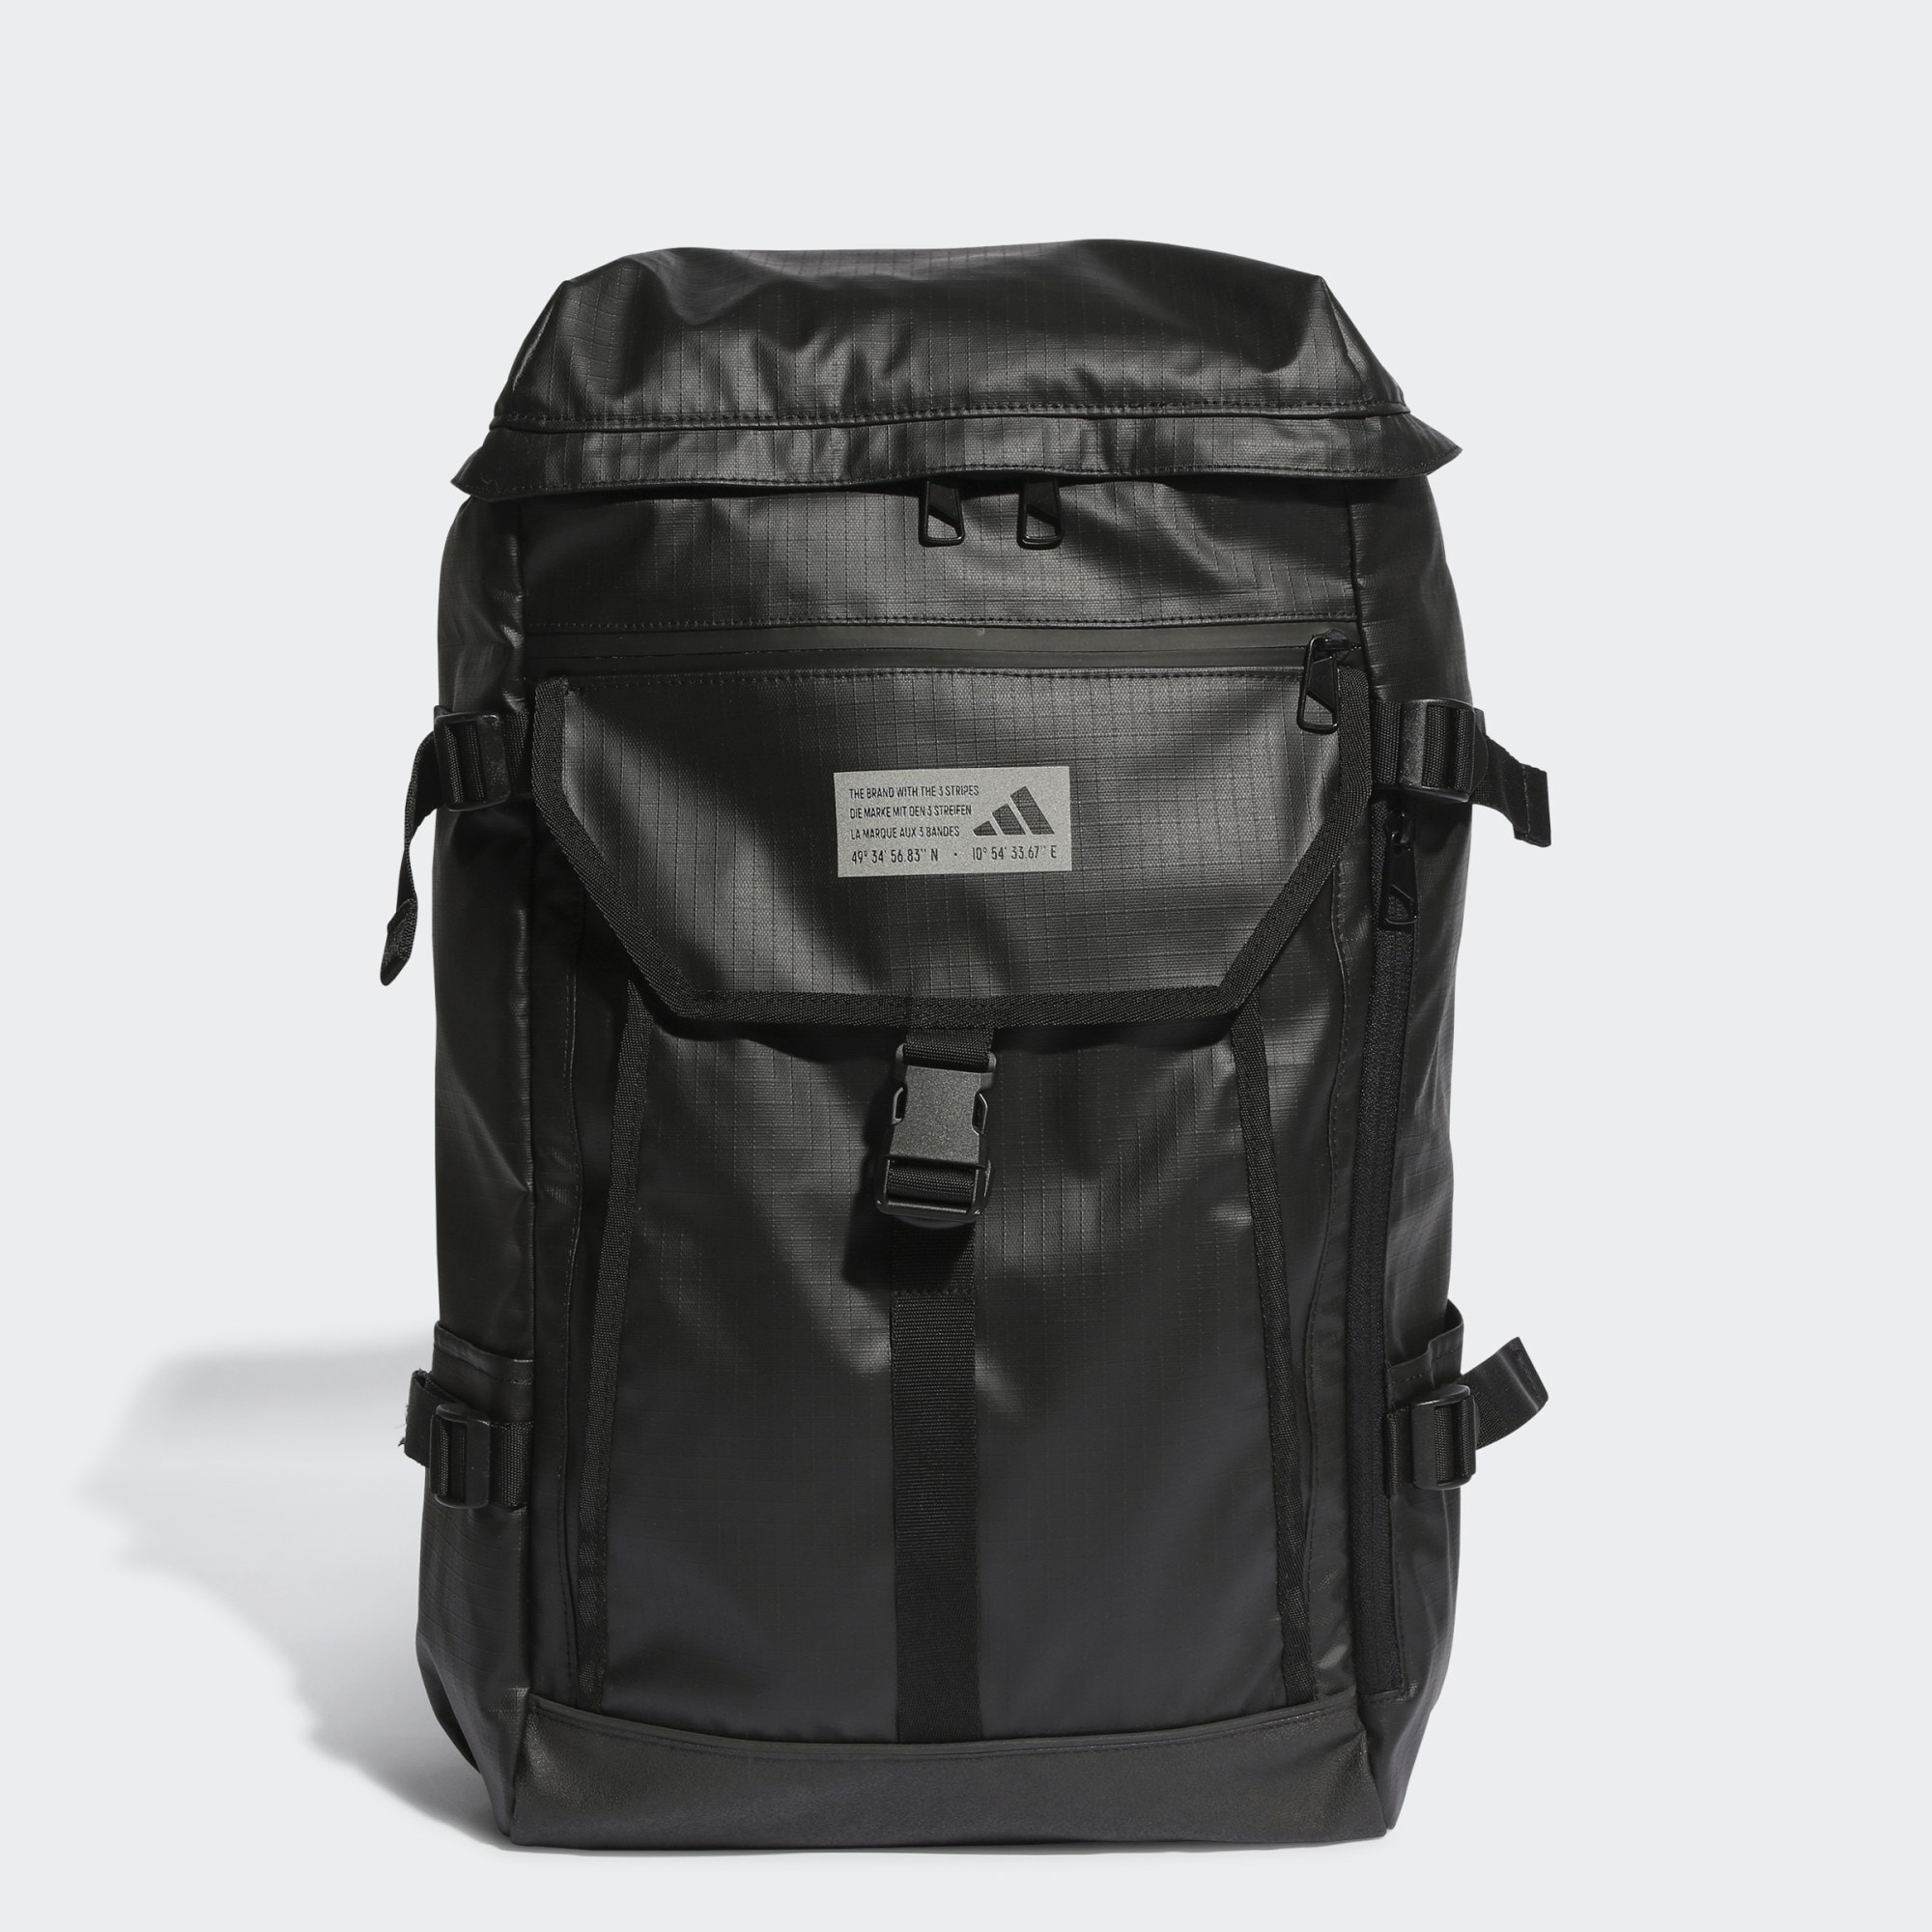 adidas 4ATHLTS ID Backpack Black Bags & Luggage | Pro:Direct Soccer